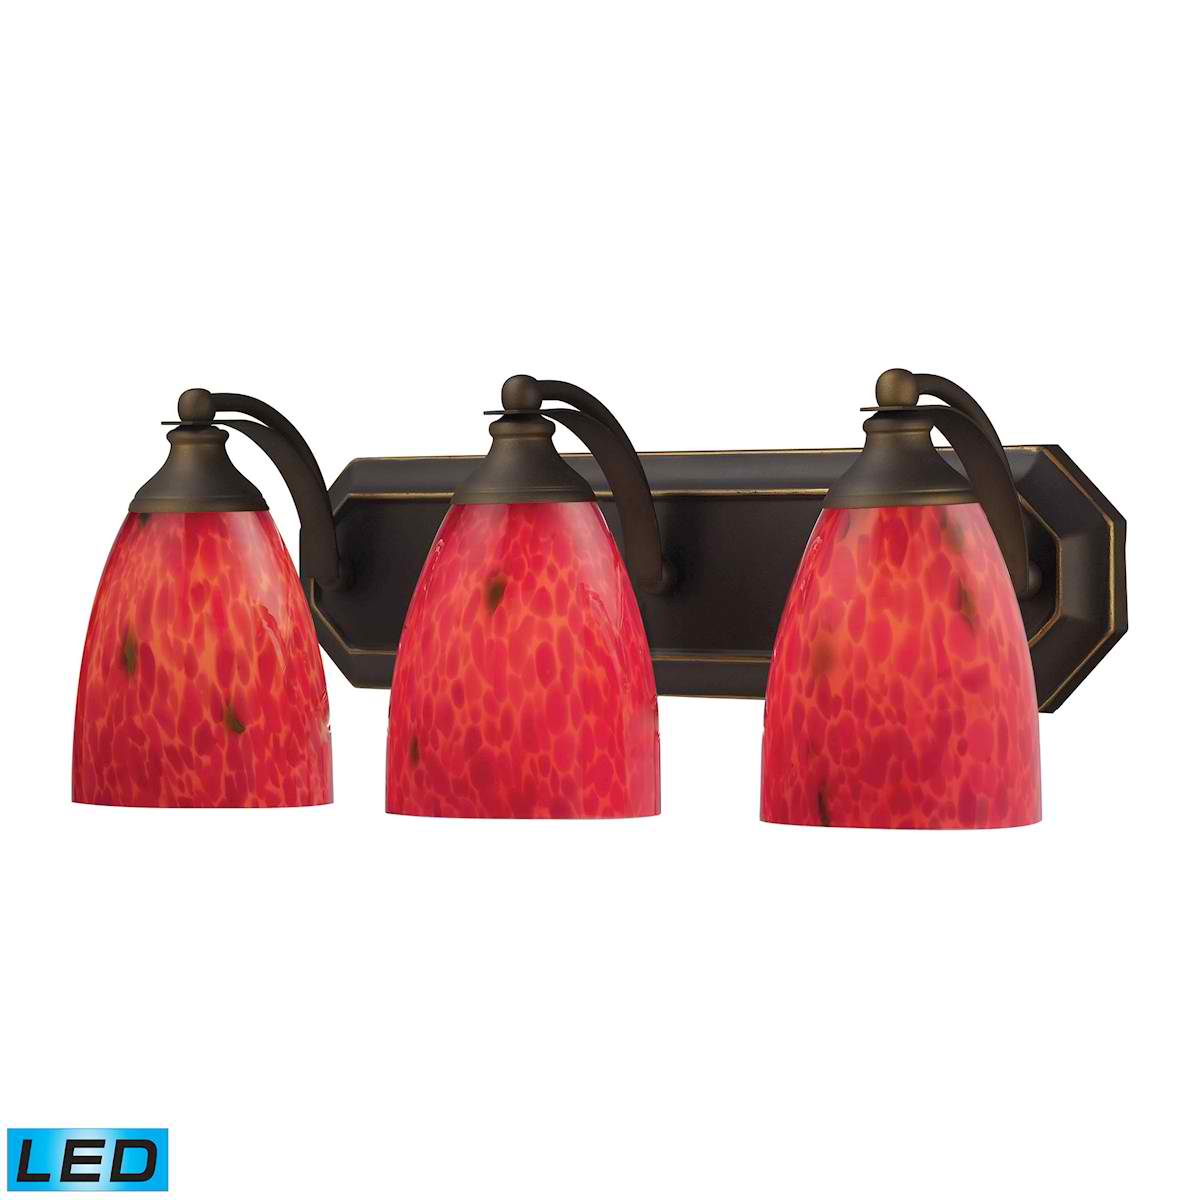 3 Light Vanity in Aged Bronze and Fire Red Glass - LED, 800 Lumens (2400 Lumens Total) with Full Scale